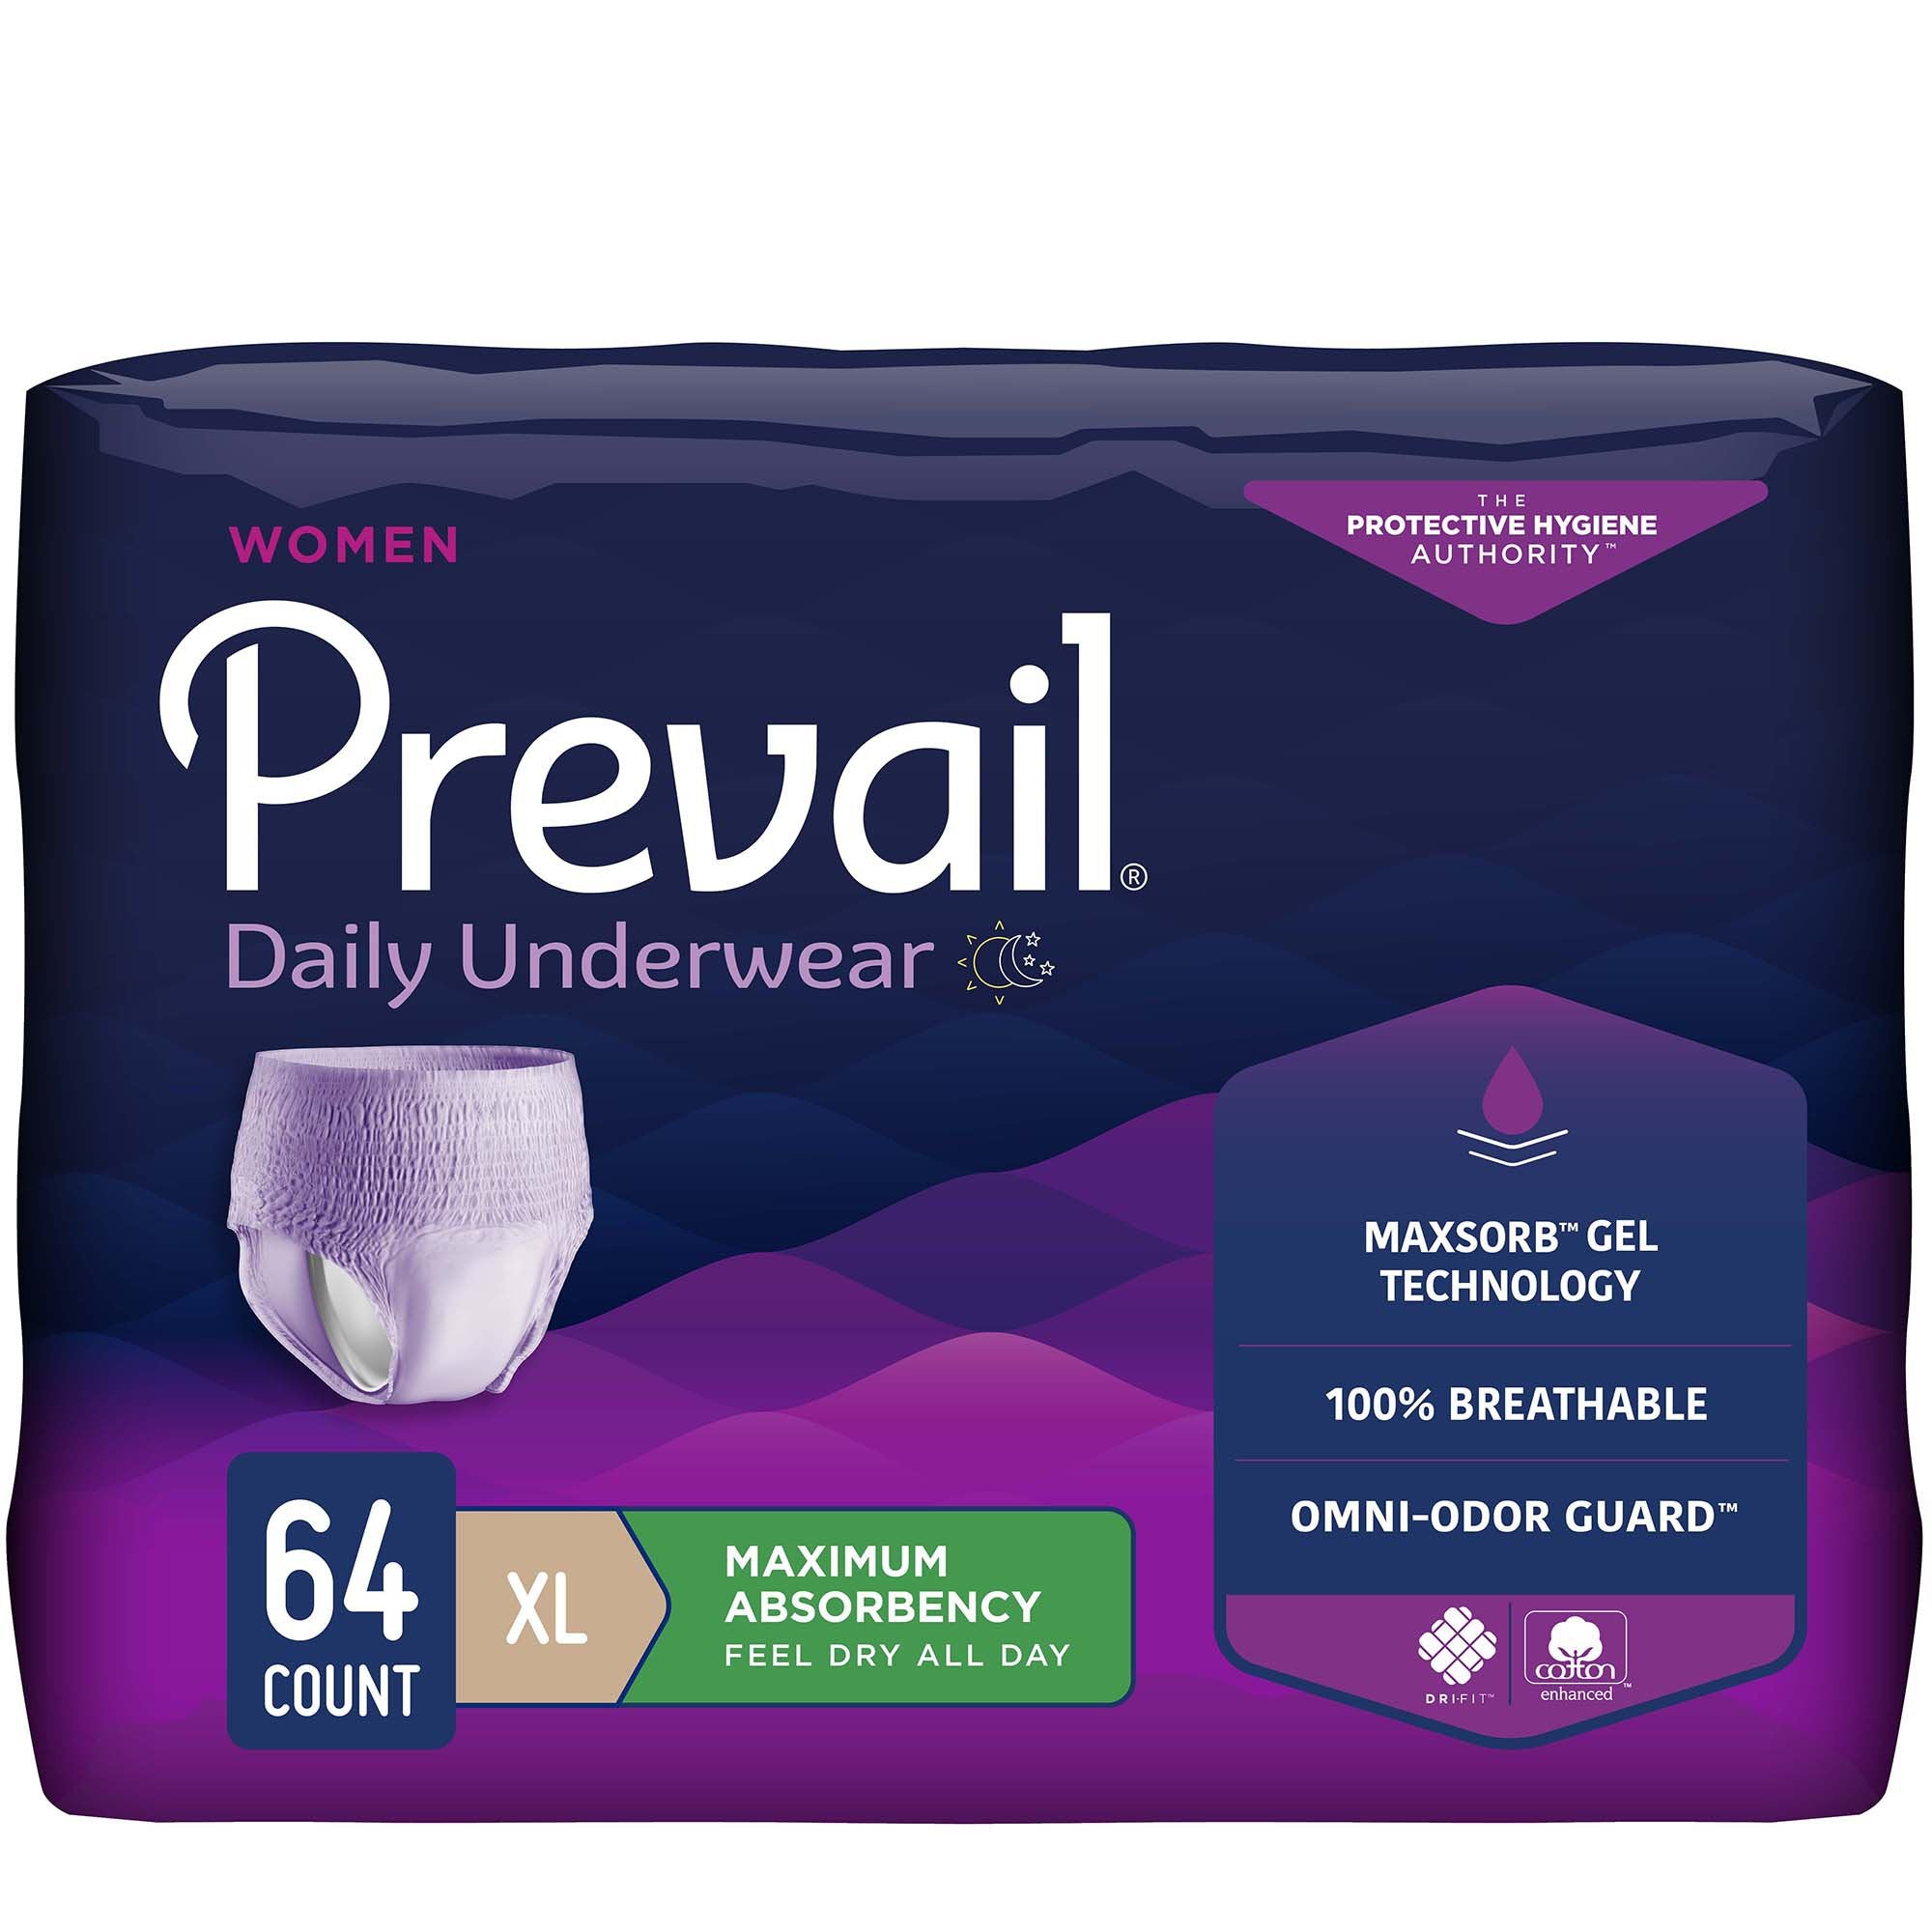 Prevail® Daily Women's Absorbent Underwear XL - Breathable Comfort (64 Pack)